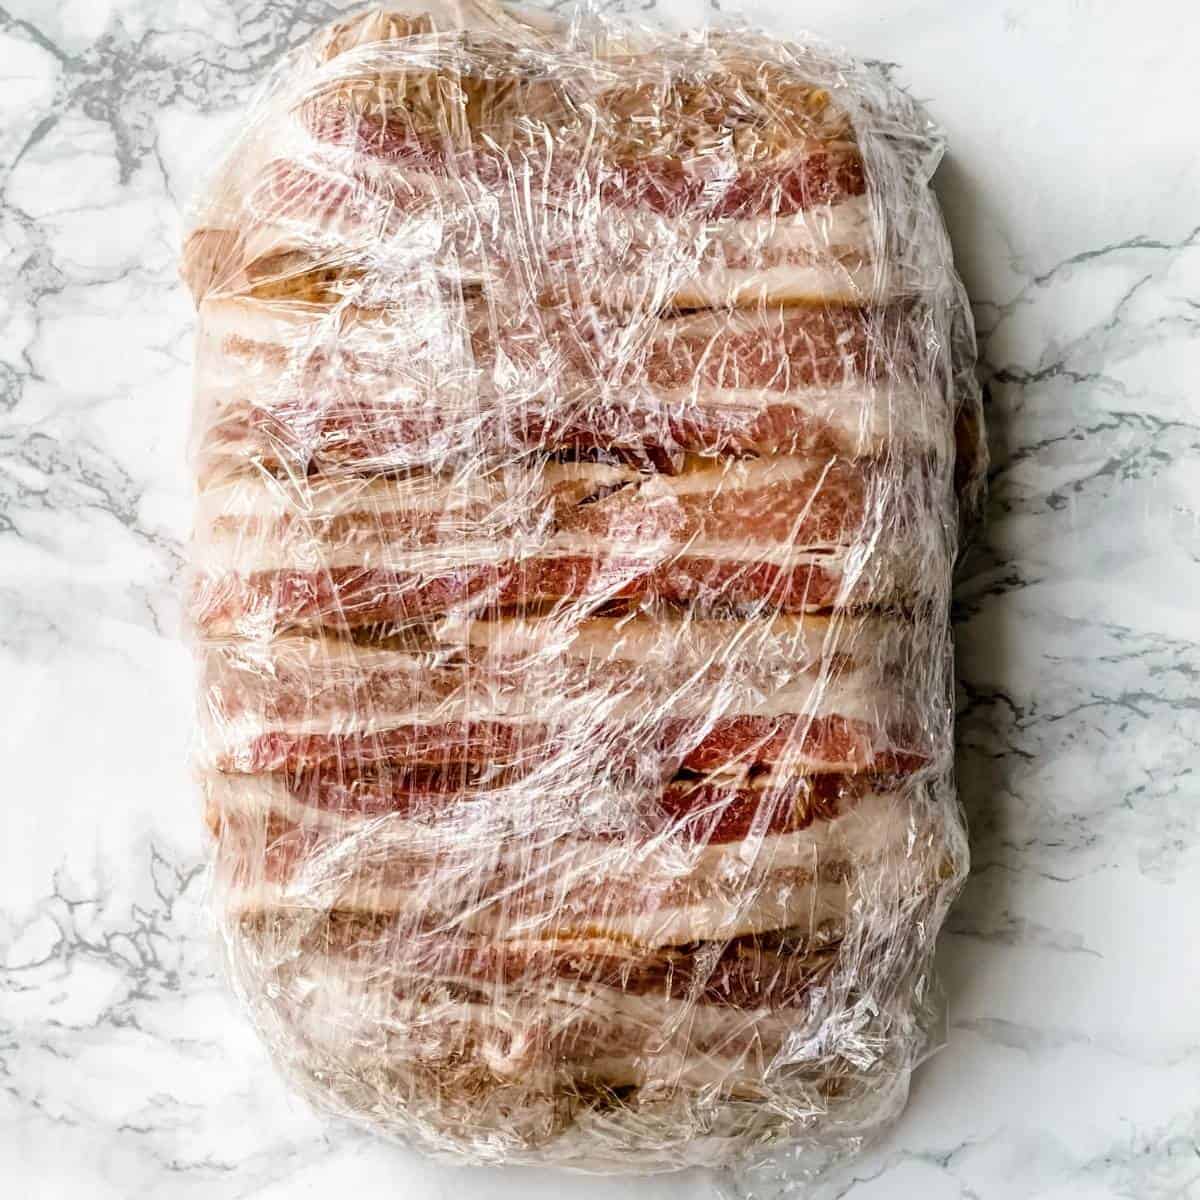 meatloaf wrapped in plastic wrap